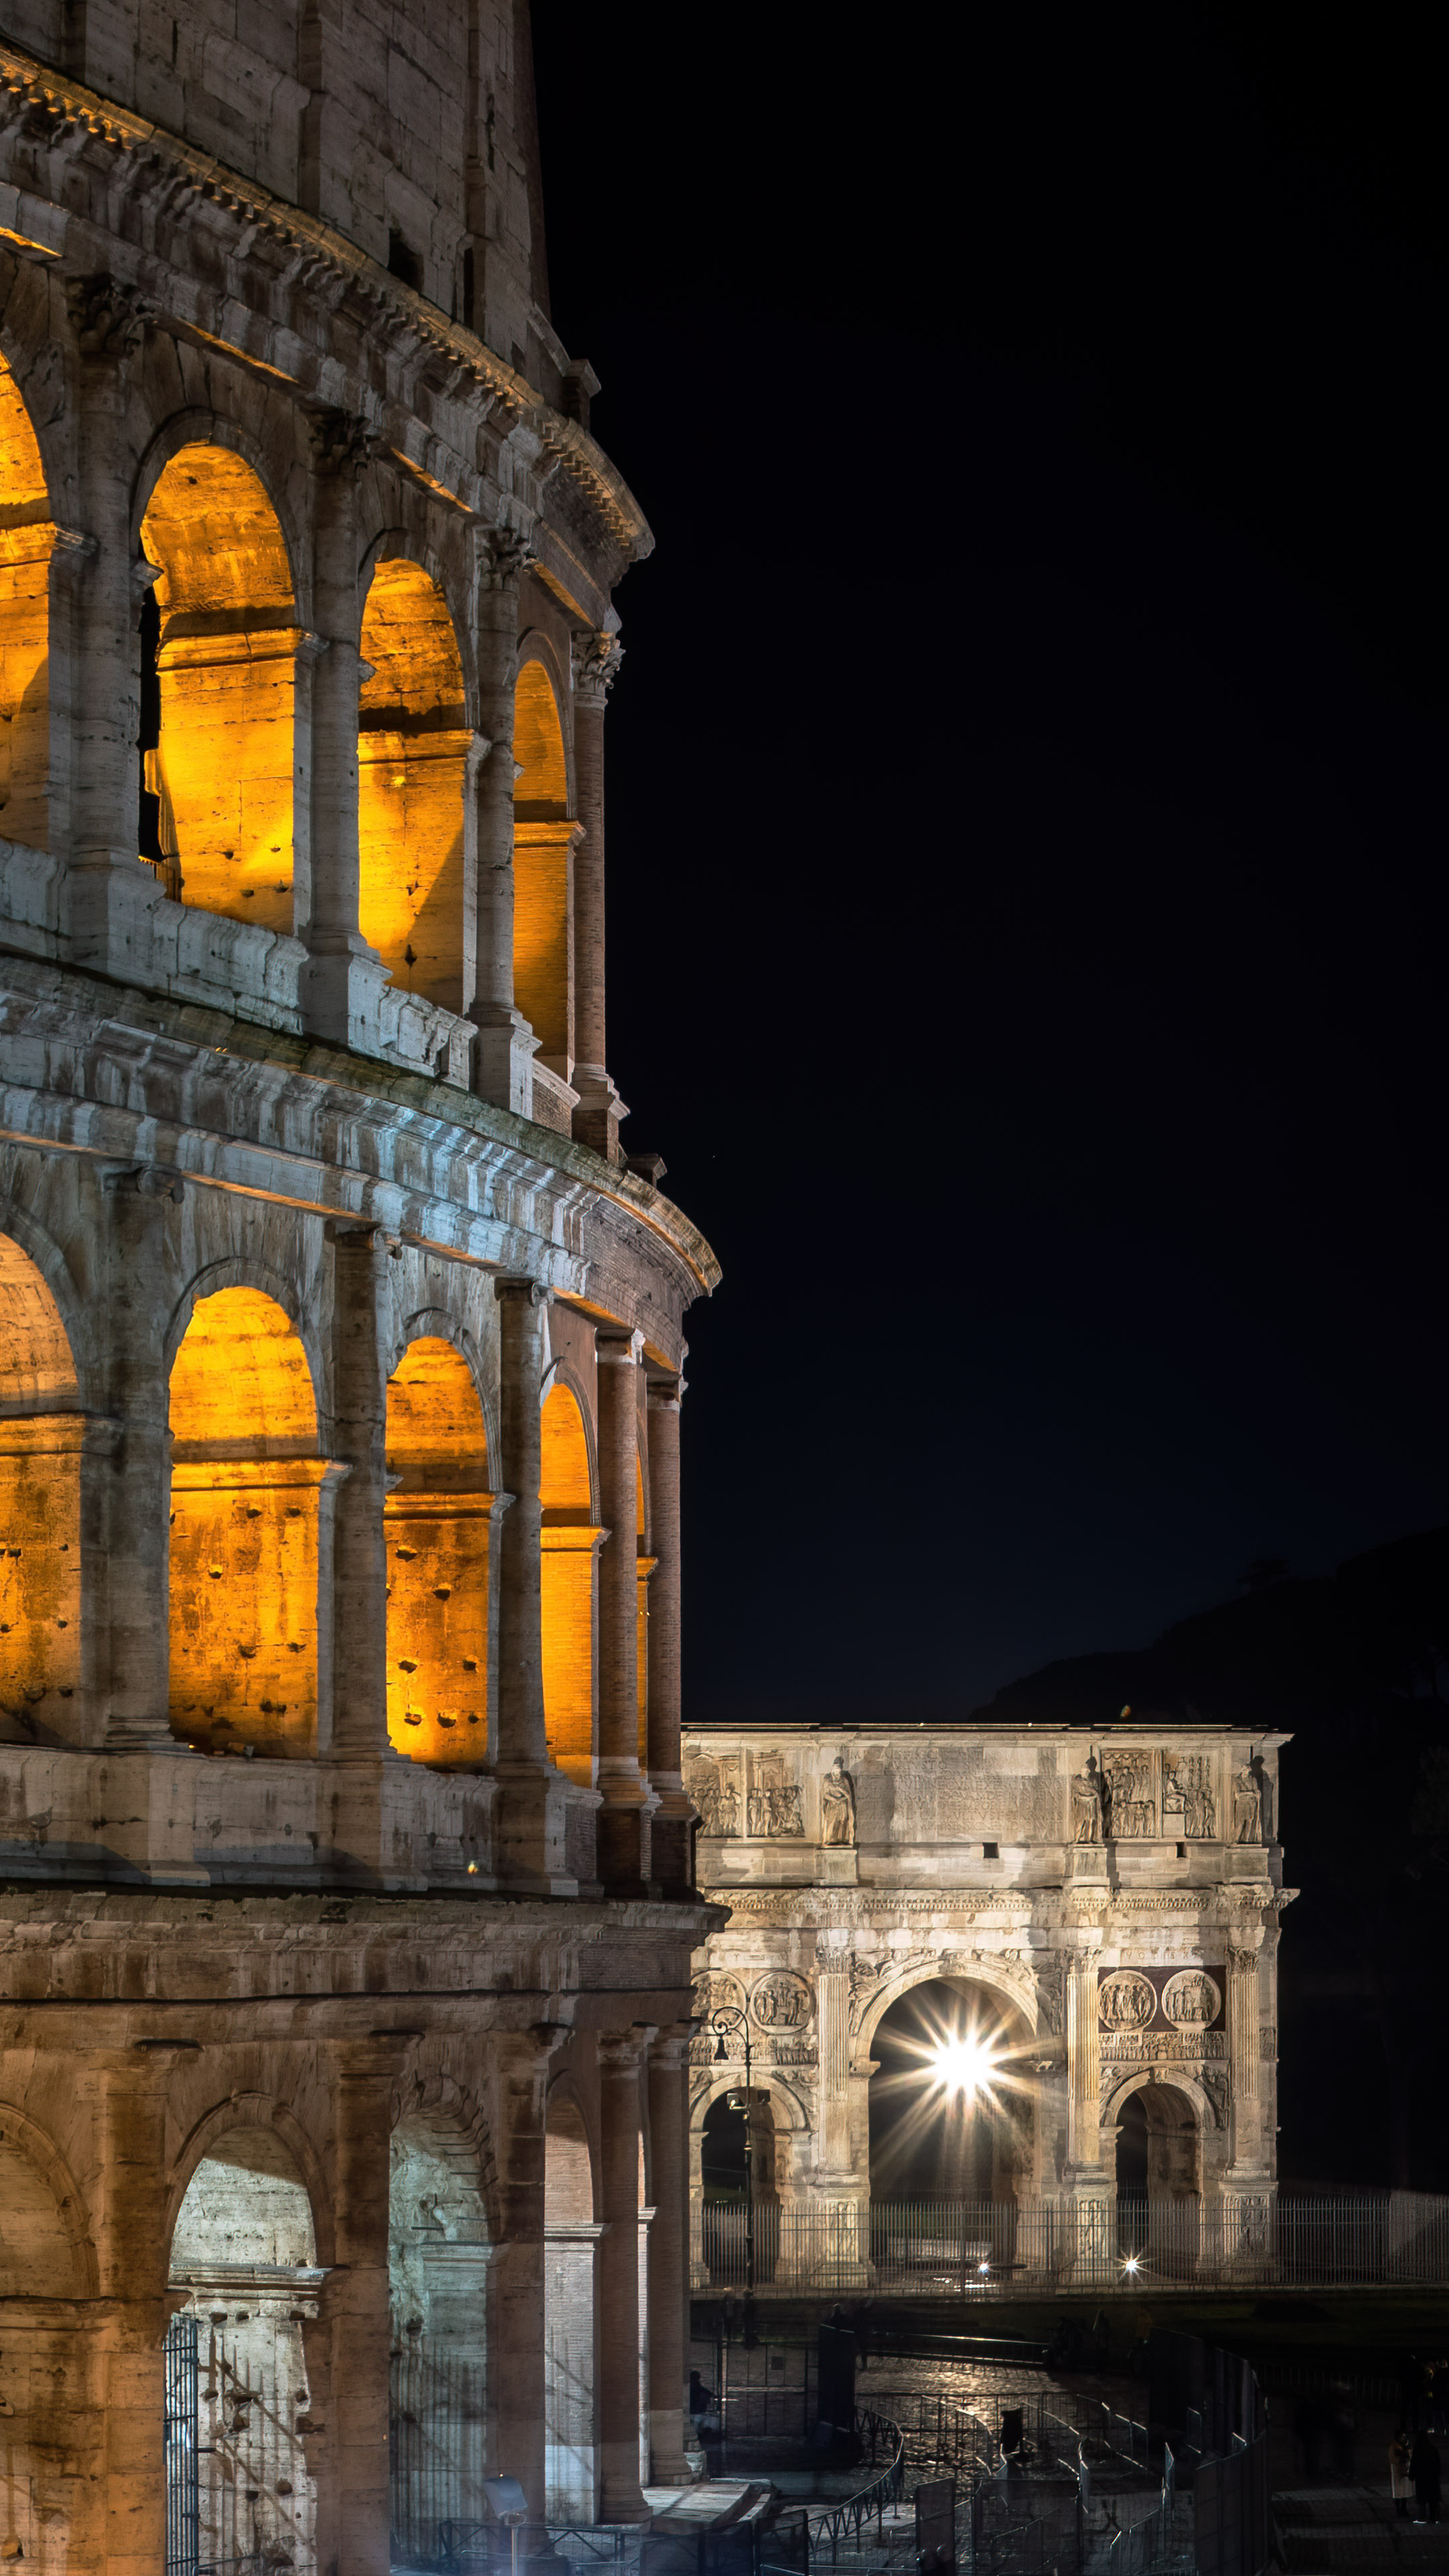 Get wallpaper of charming Colosseum in Rome city at night with colorful lights and buildings